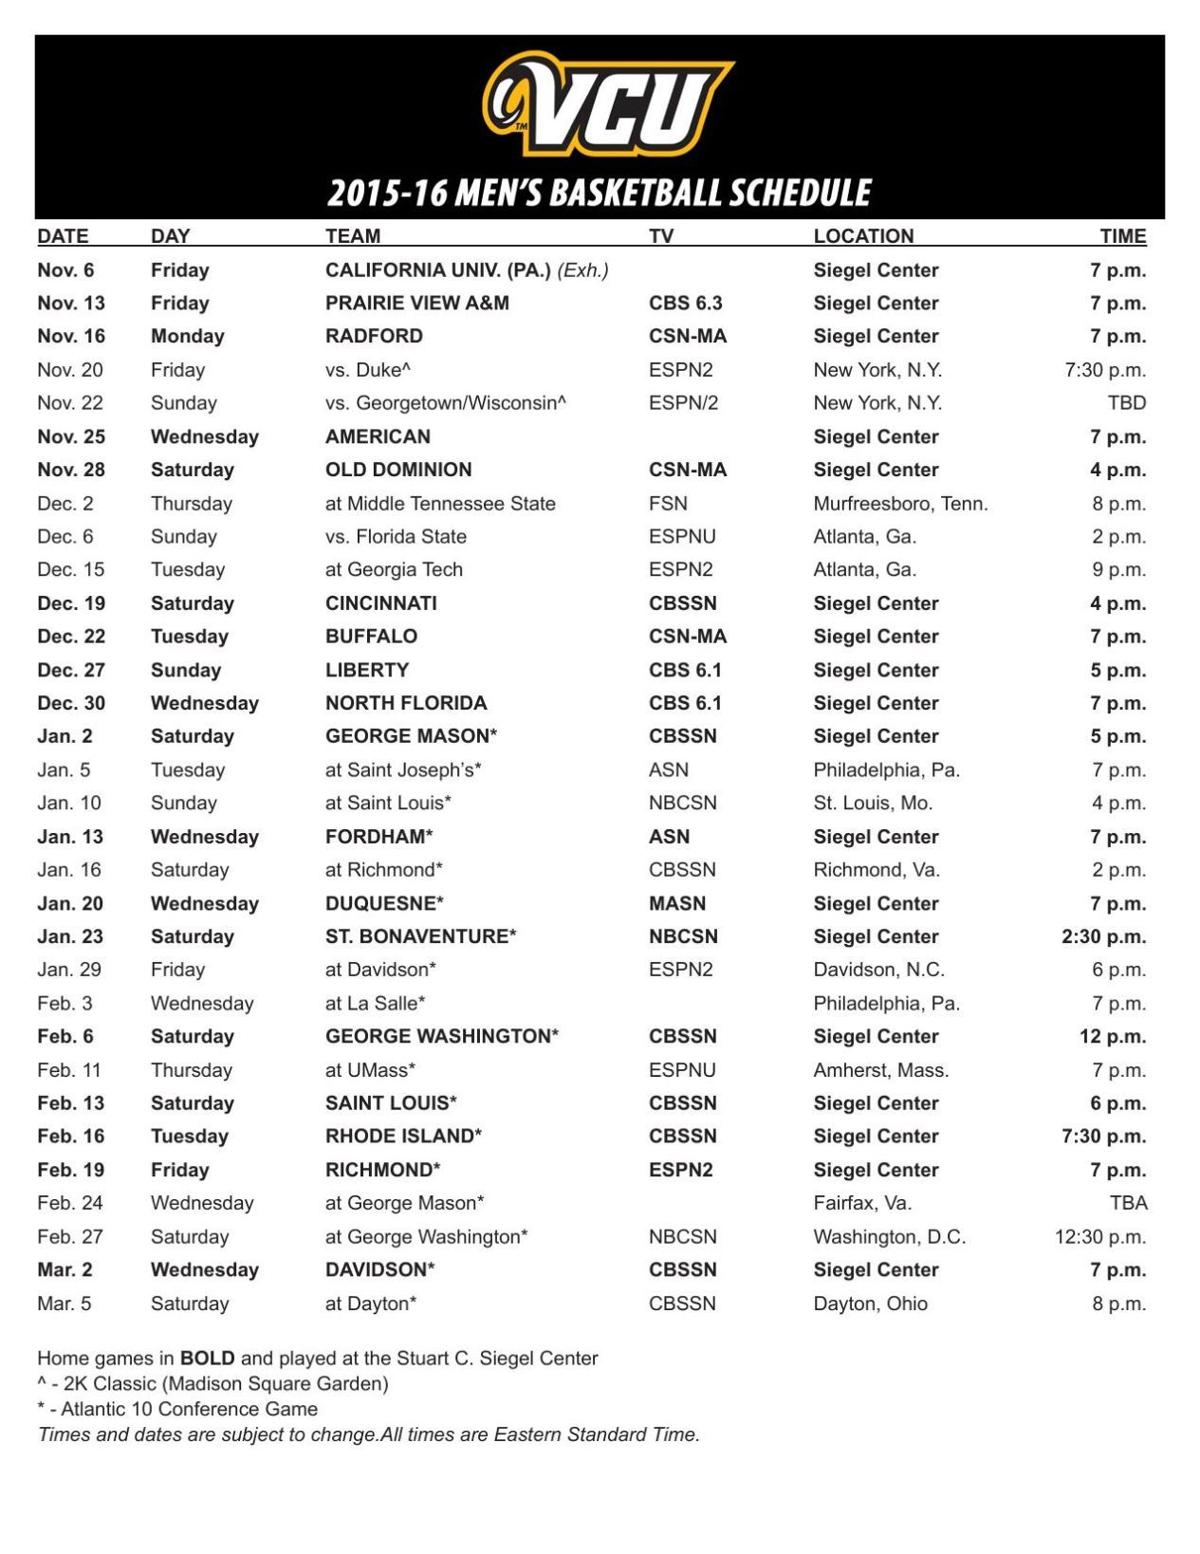 VCU releases complete 2015-16 schedule with times, TV | College Basketball | richmond.com1200 x 1554